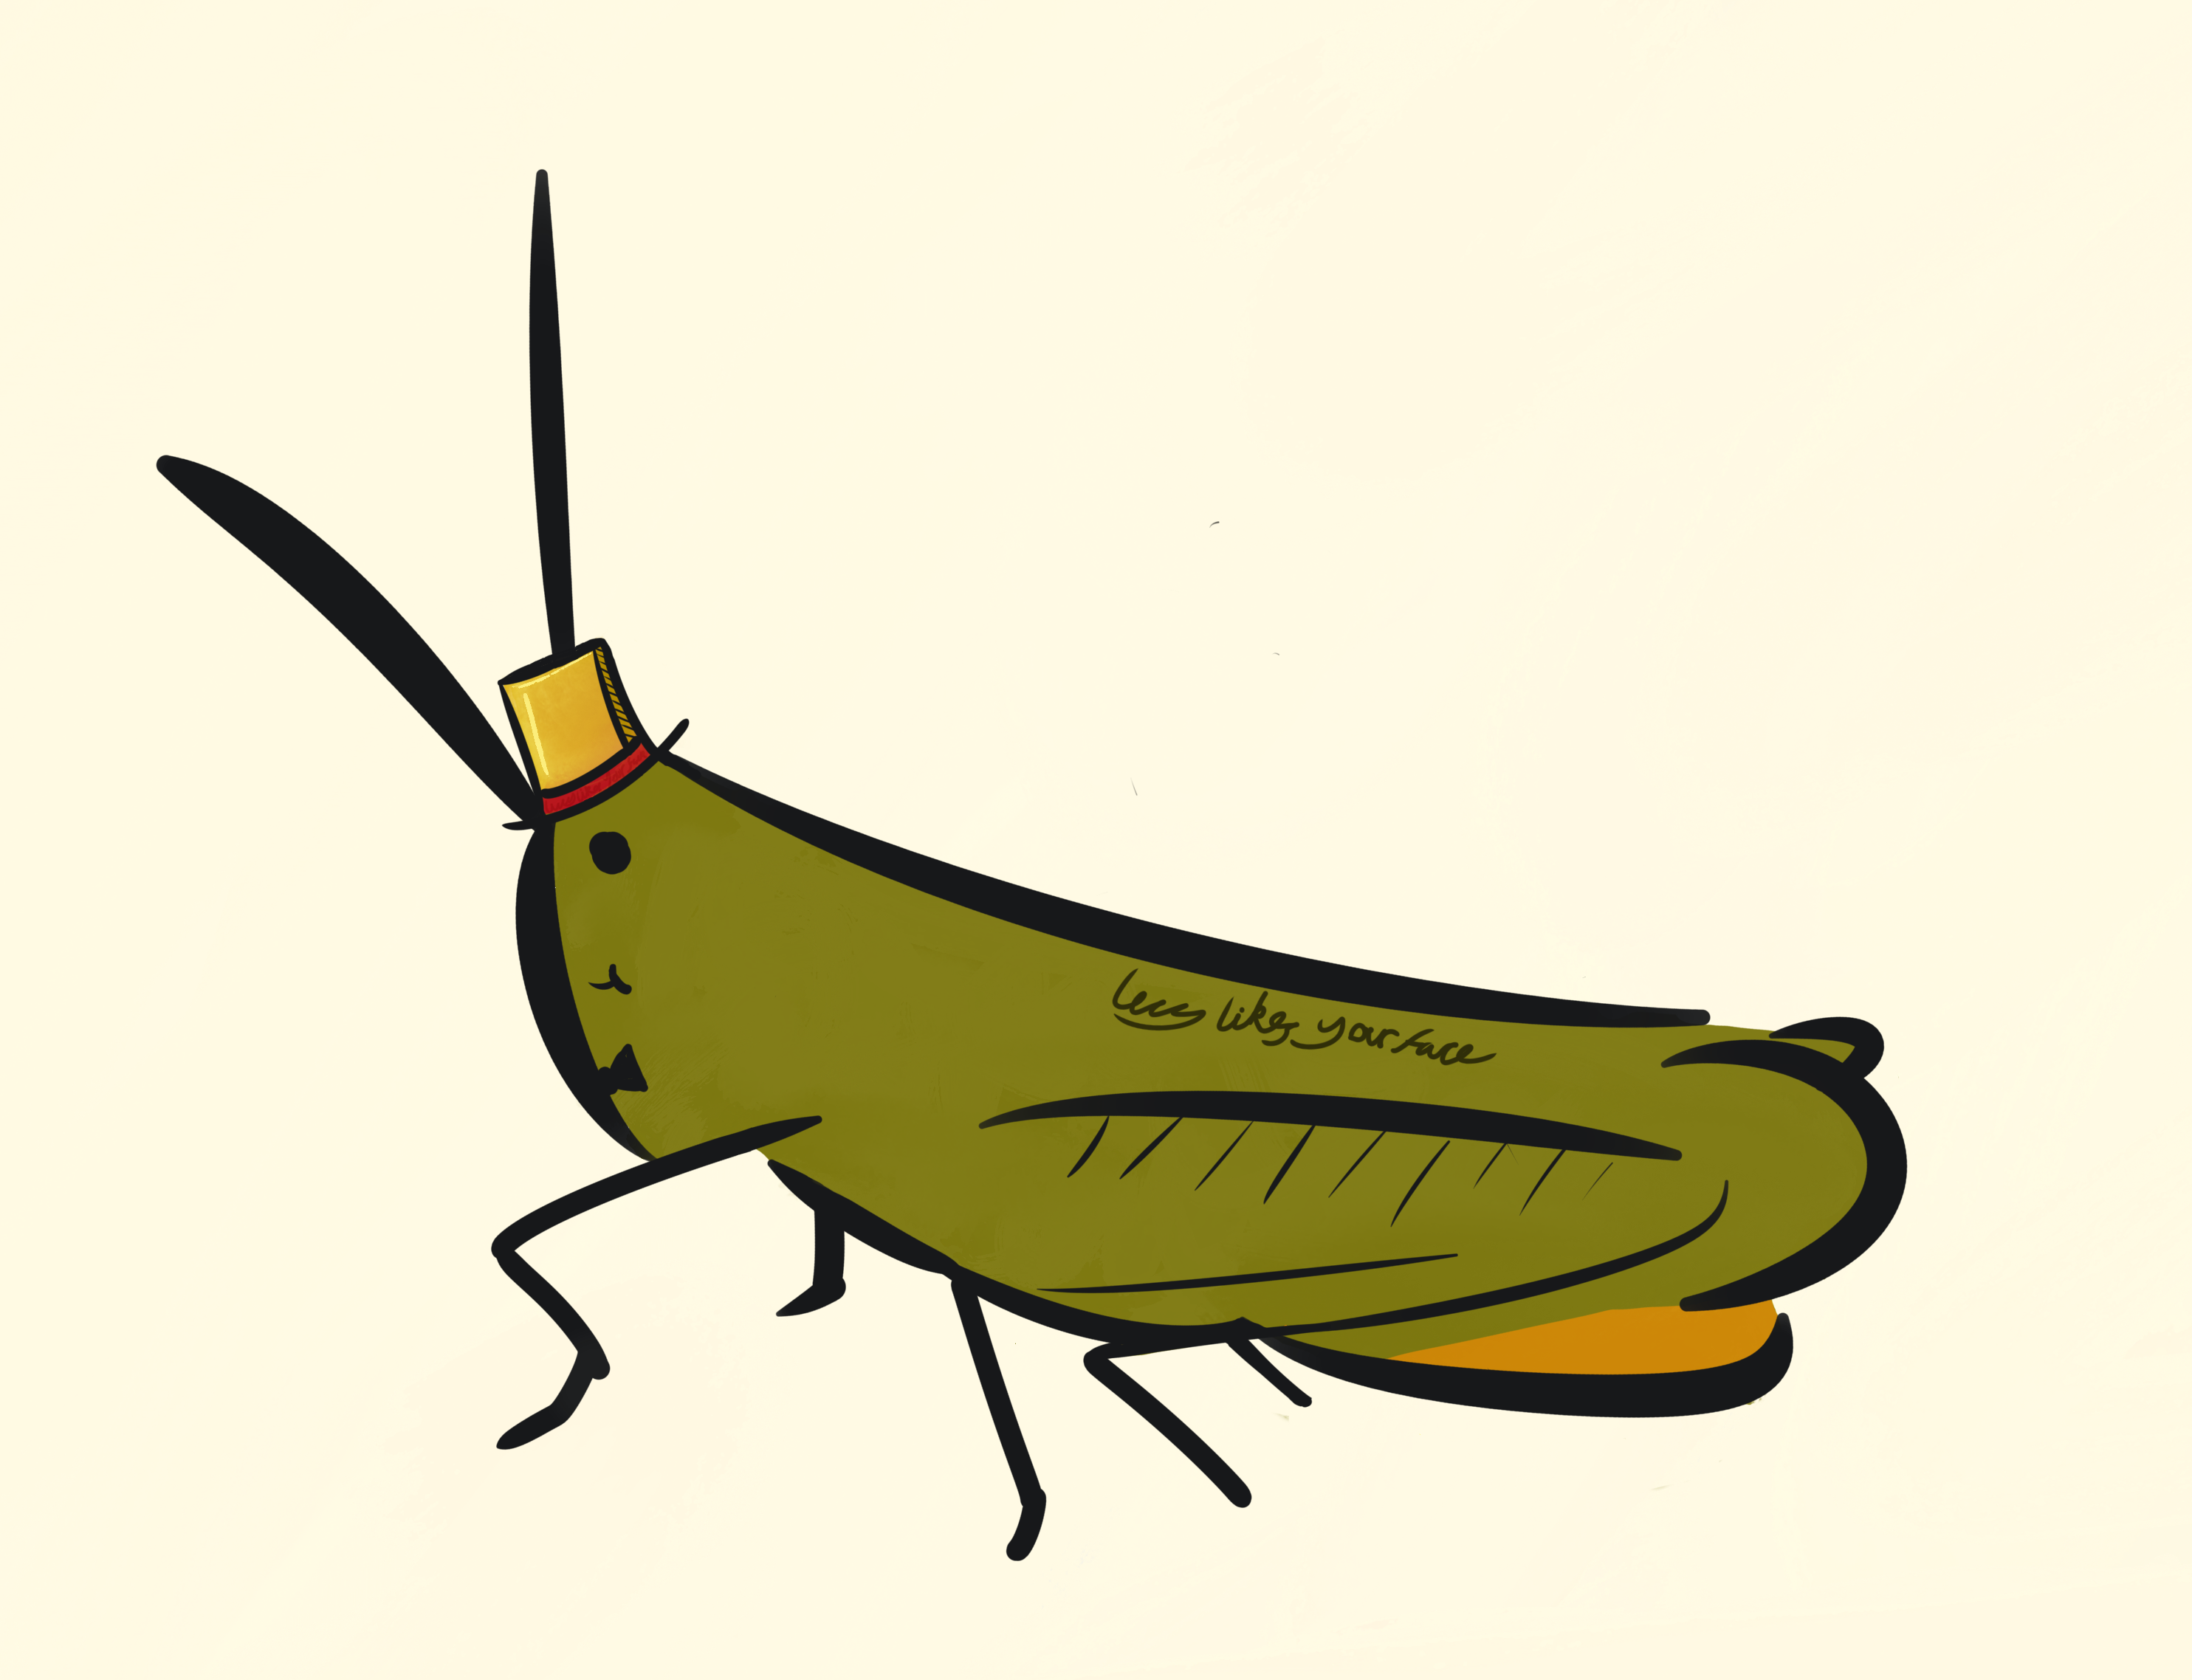 A digital drawing of a cricket with a tiny top hat and bowtie.